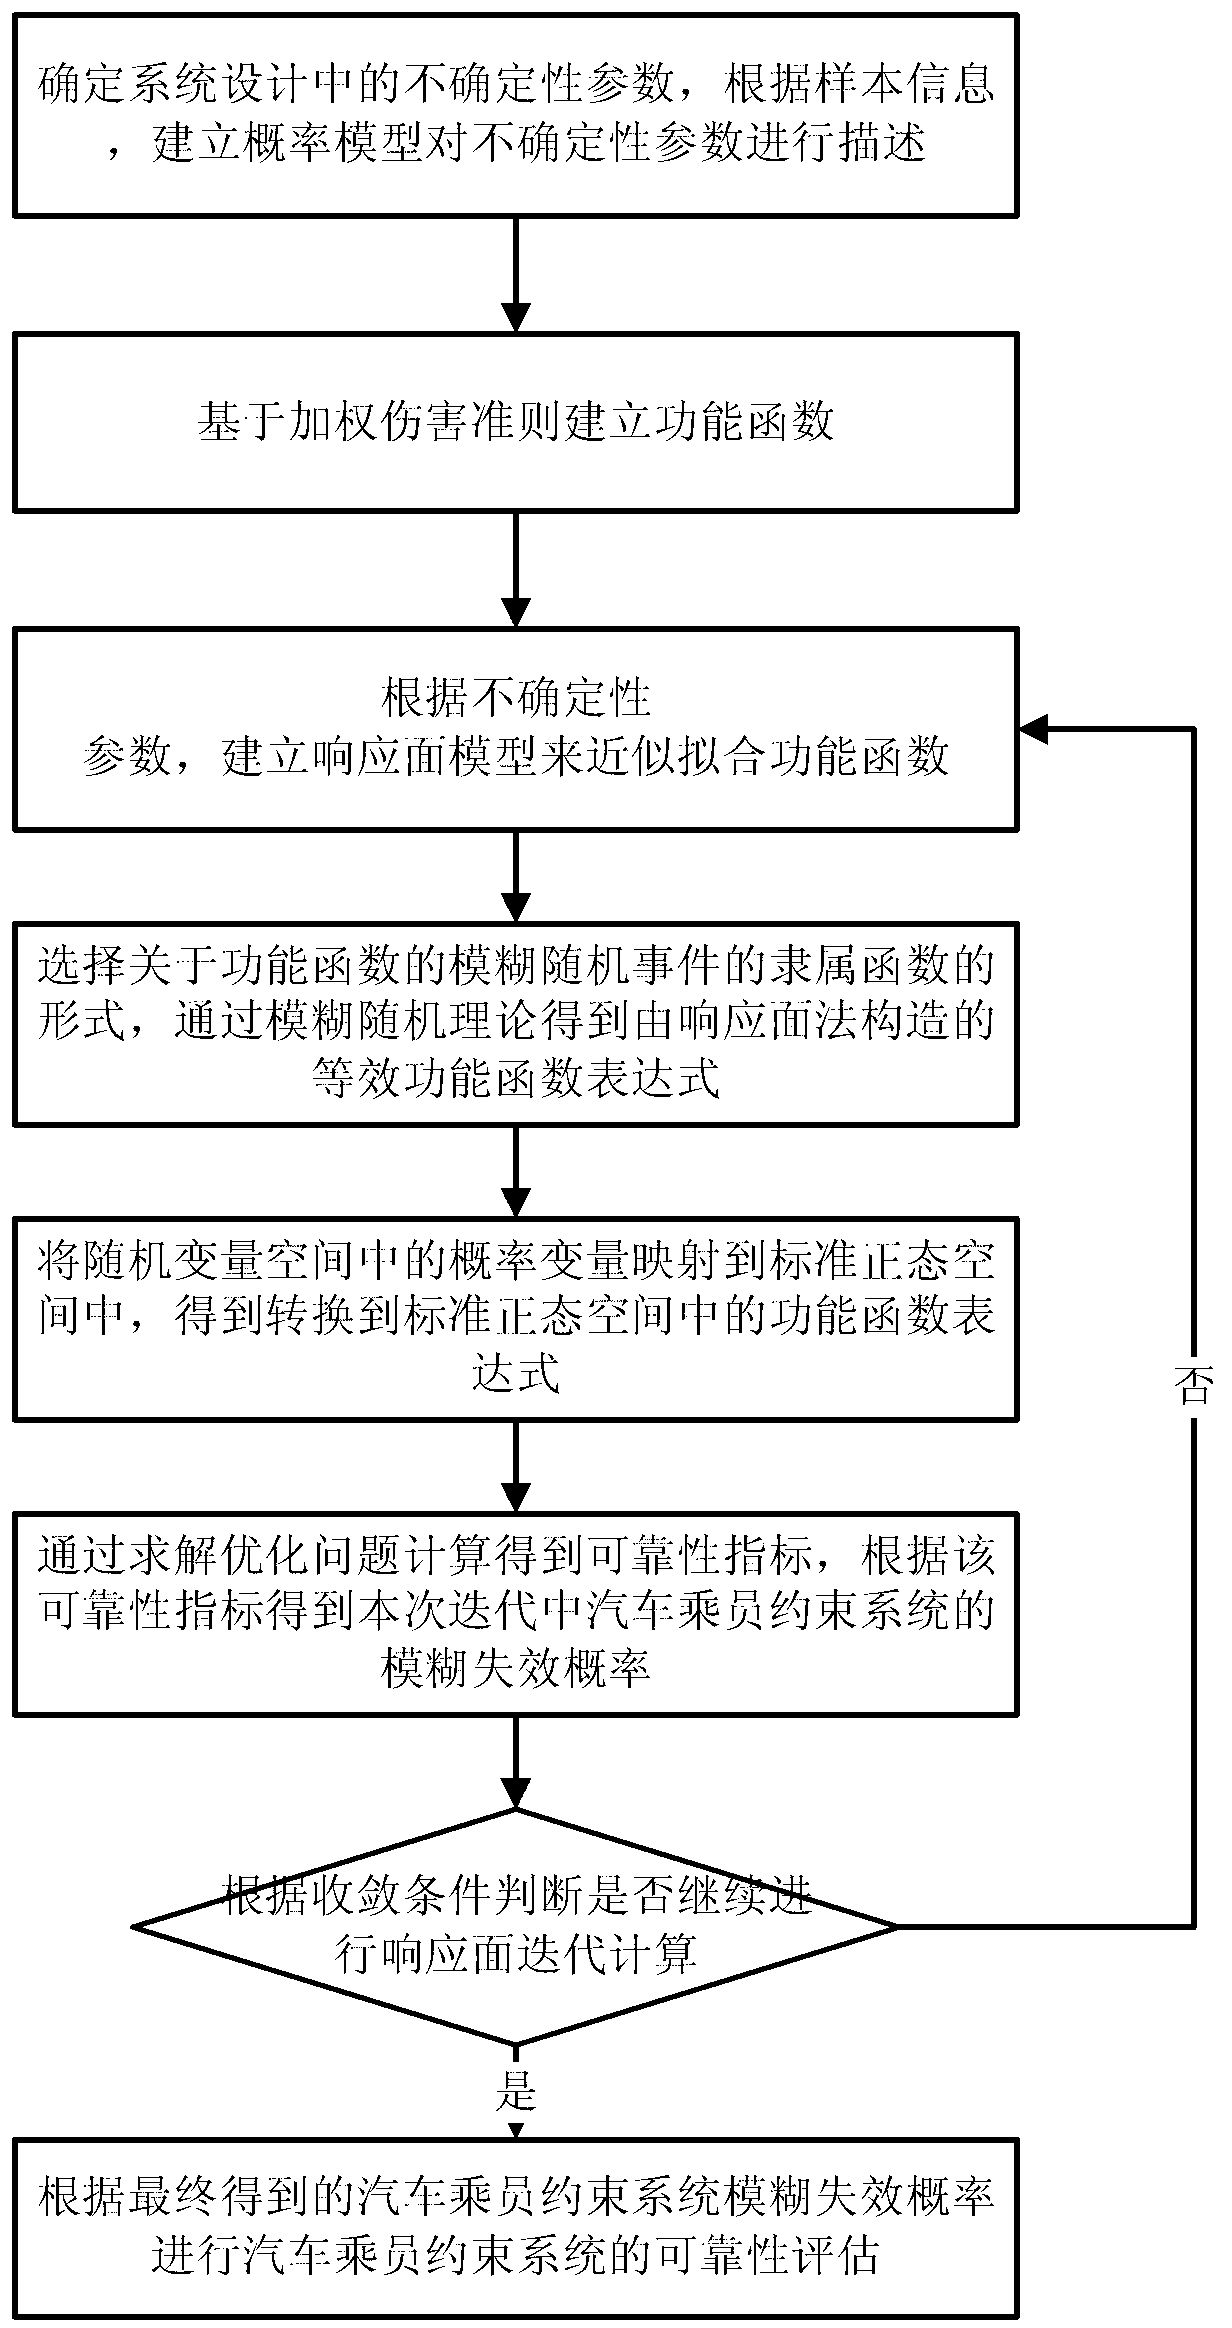 Assessment method for fuzzy reliability of automobile passenger restraint system